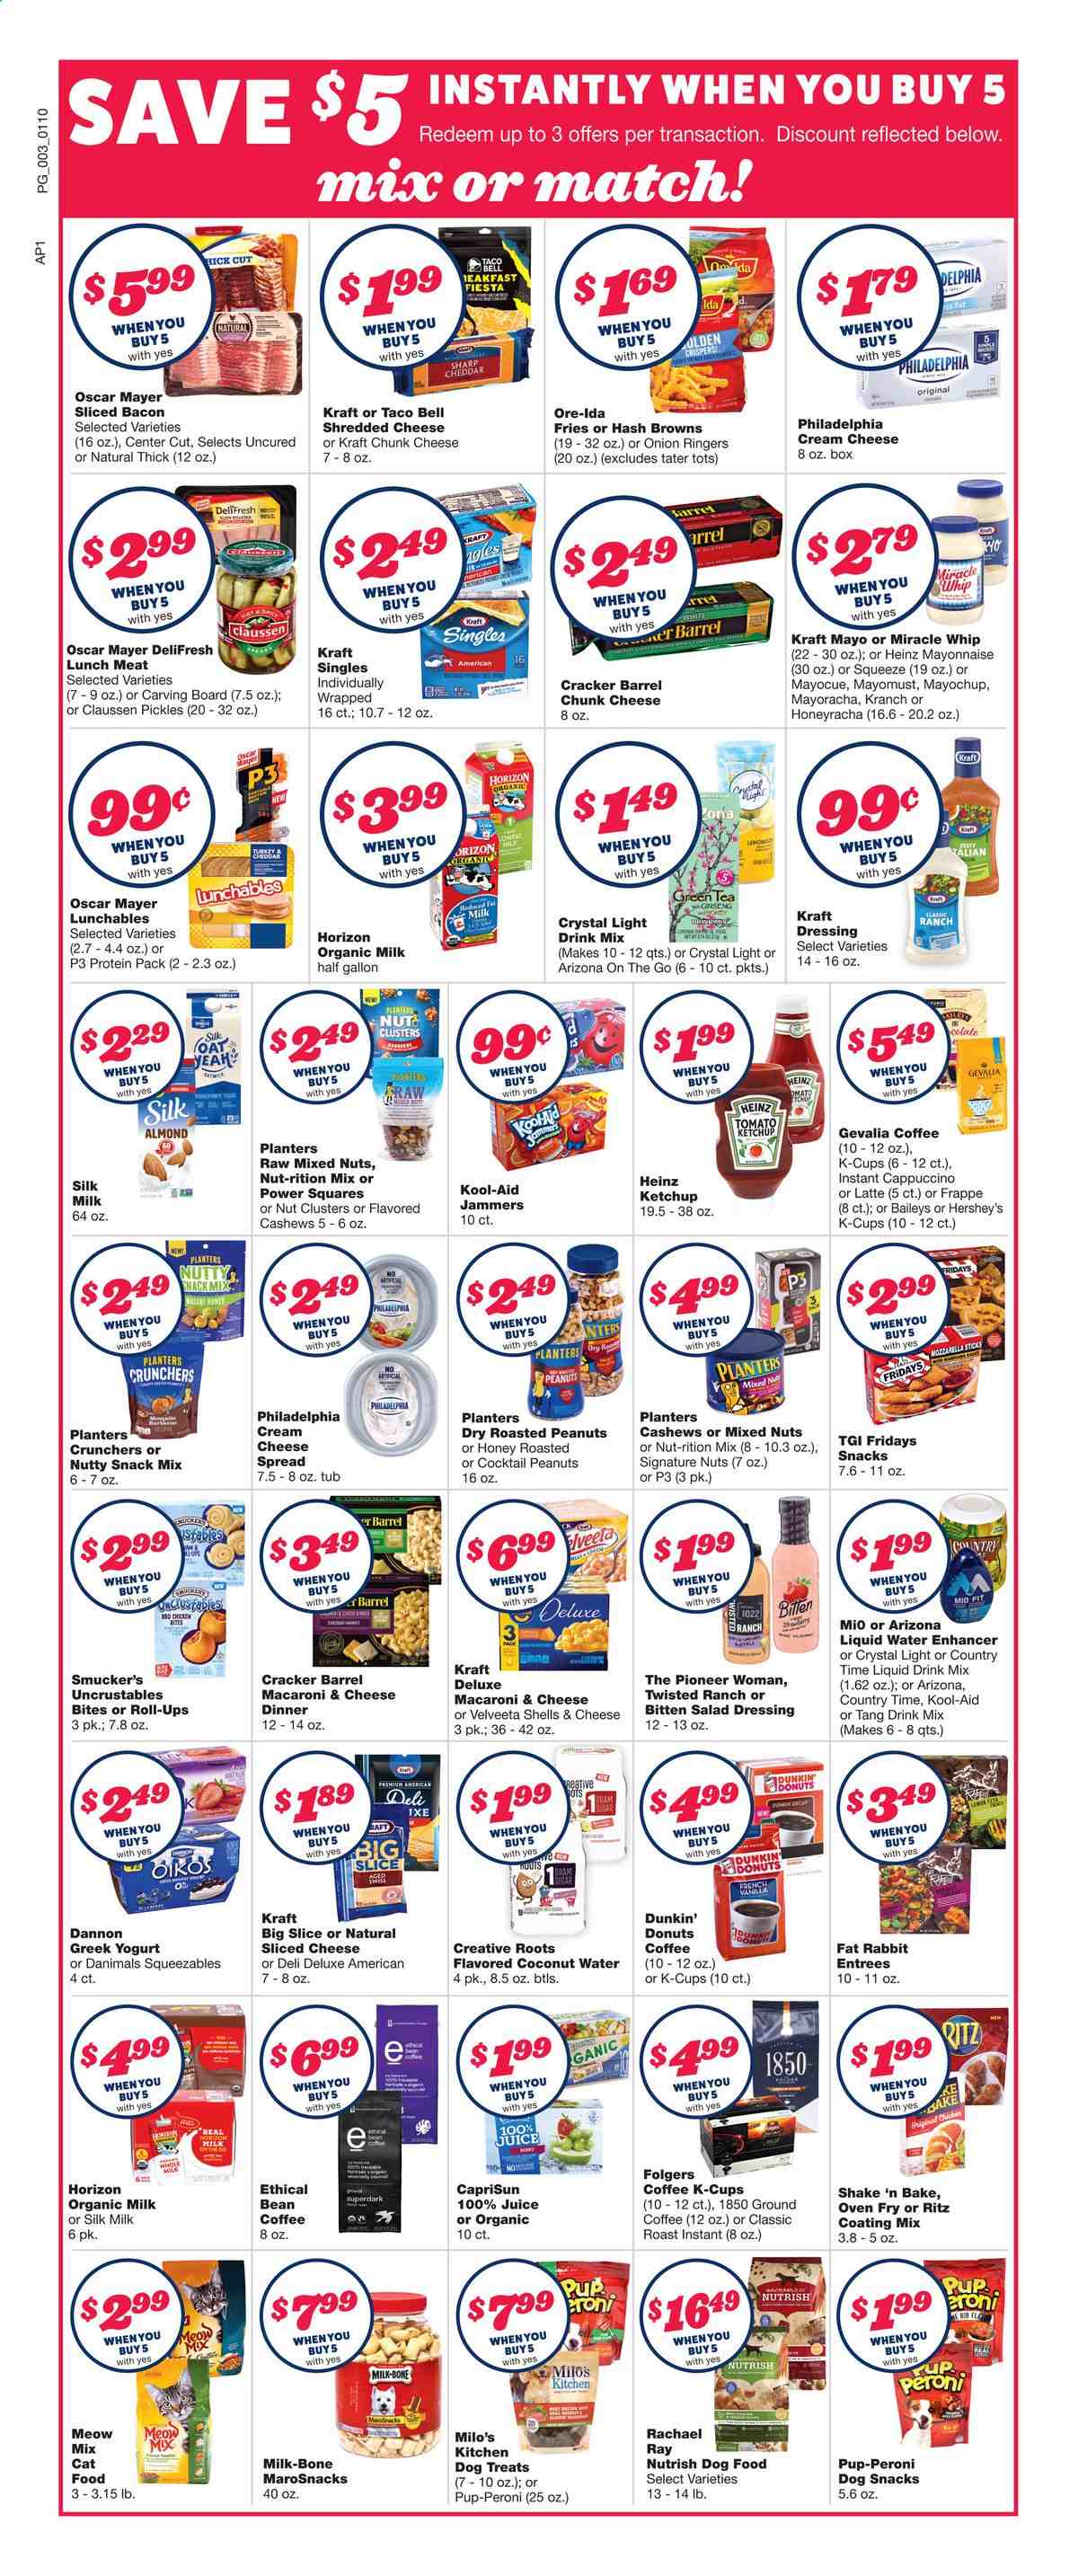 thumbnail - Family Fare Flyer - 01/10/2021 - 01/16/2021 - Sales products - pickles, donut, cream cheese, macaroni & cheese, hash browns, Lunchables, Kraft®, bacon, Oscar Mayer, cheese spread, lunch meat, mozzarella, sandwich slices, shredded cheese, sliced cheese, Philadelphia, cheddar, Kraft Singles, chunk cheese, greek yoghurt, yoghurt, Oikos, Dannon, Danimals, organic milk, shake, mayonnaise, Miracle Whip, Hershey's, potato fries, Ore-Ida, crackers, RITZ, snack, oats, Heinz, wasabi, salad dressing, ketchup, dressing, honey, cashews, roasted peanuts, peanuts, mixed nuts, Planters, juice, coconut water, AriZona, Milo's, Country Time, green tea, tea, cappuccino, coffee, Folgers, ground coffee, coffee capsules, K-Cups, Gevalia, Baileys, Sharp. Page 4.